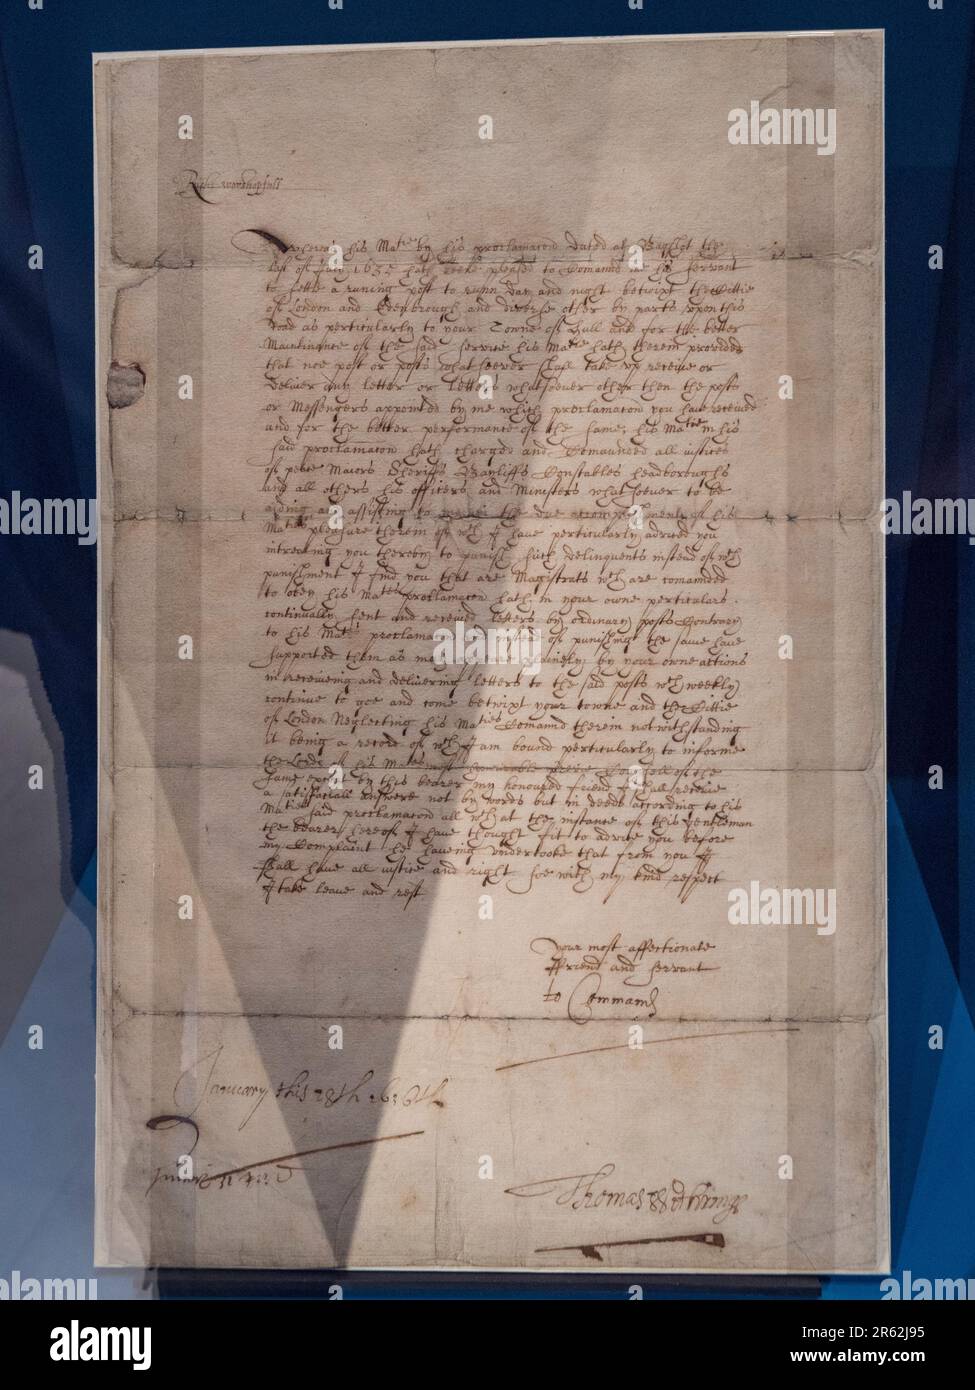 Letter relating to the setting up of the postal service (1636) on display in the Postal Museum in London, UK. Stock Photo